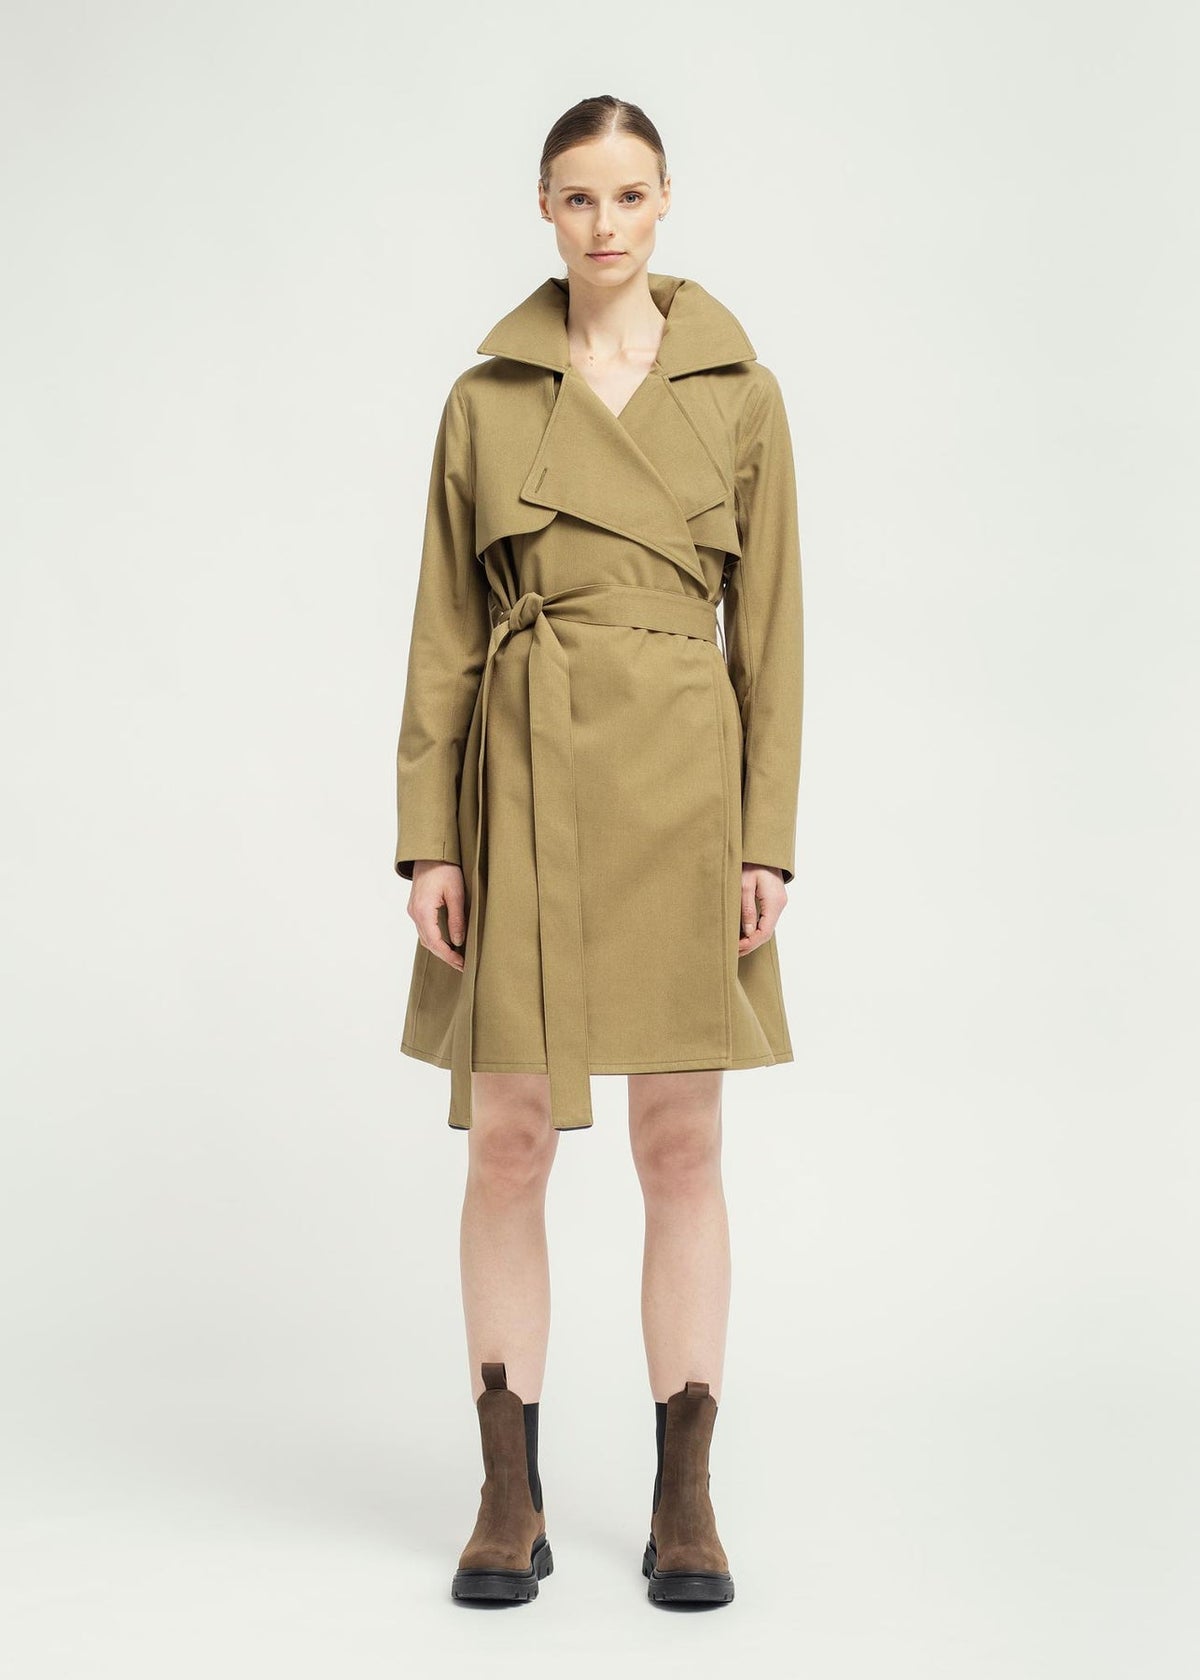 Green water and windproof trench coat with hidden hood in the collar